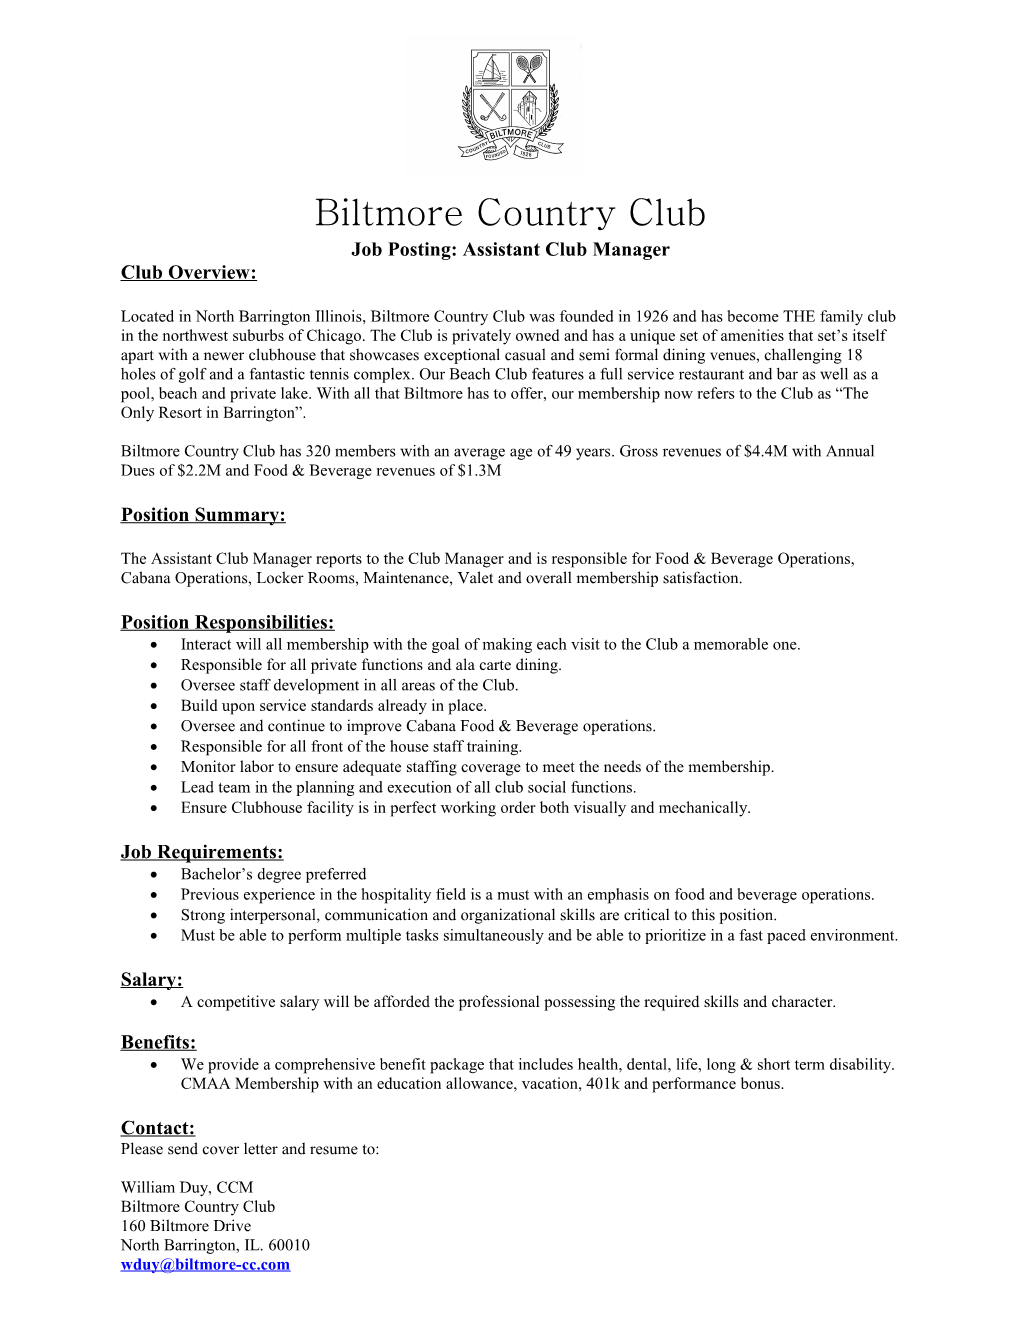 Job Posting: Assistant Club Manager